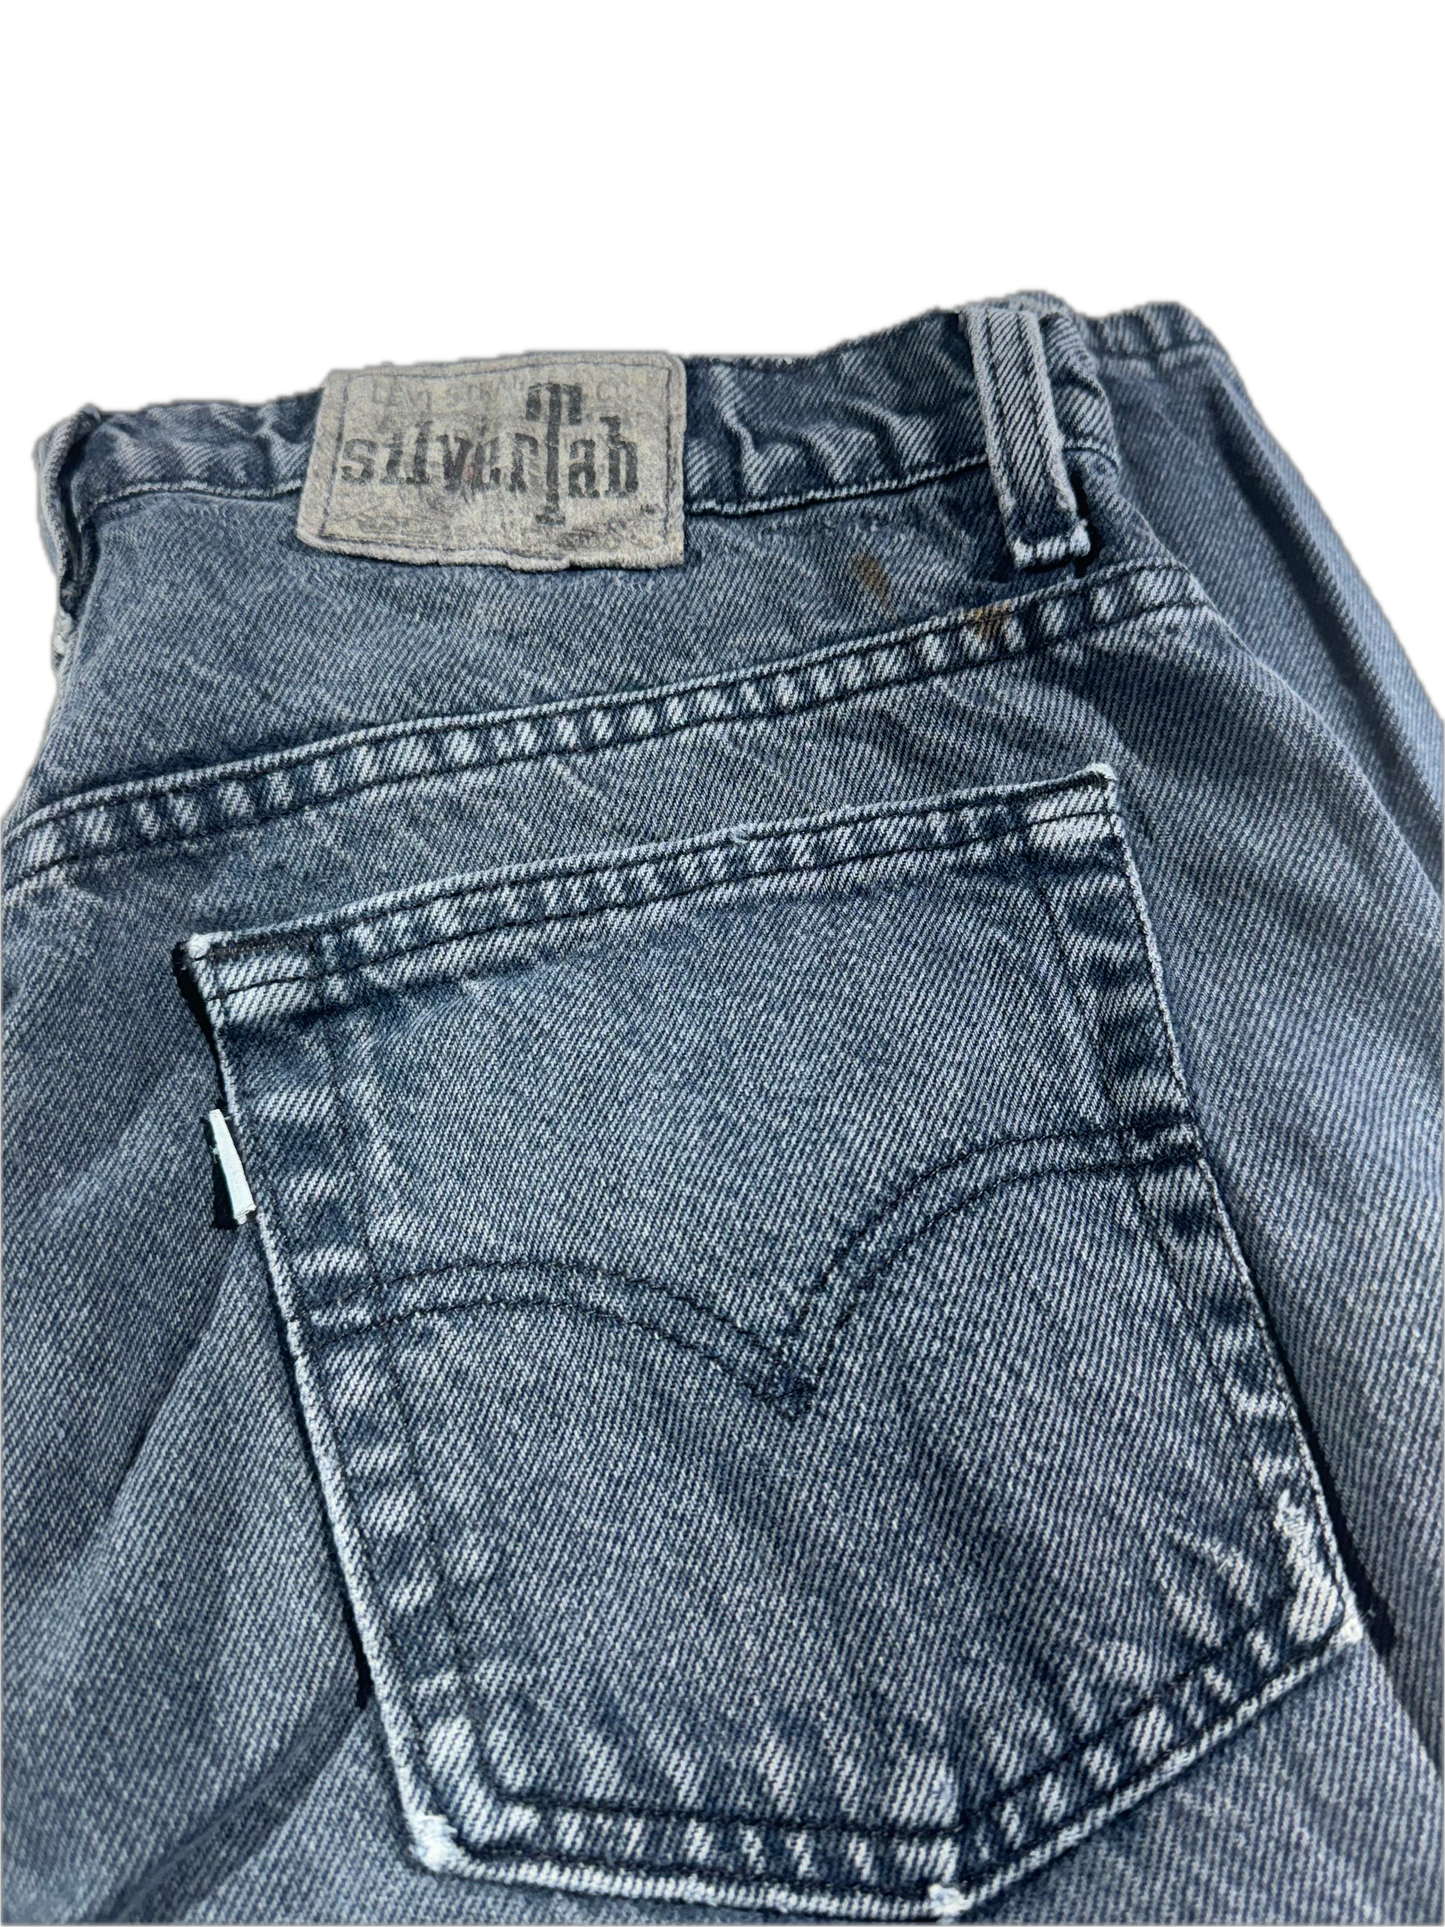 Vintage Levis Silver Tab Jeans Faded Grey Black USA Made